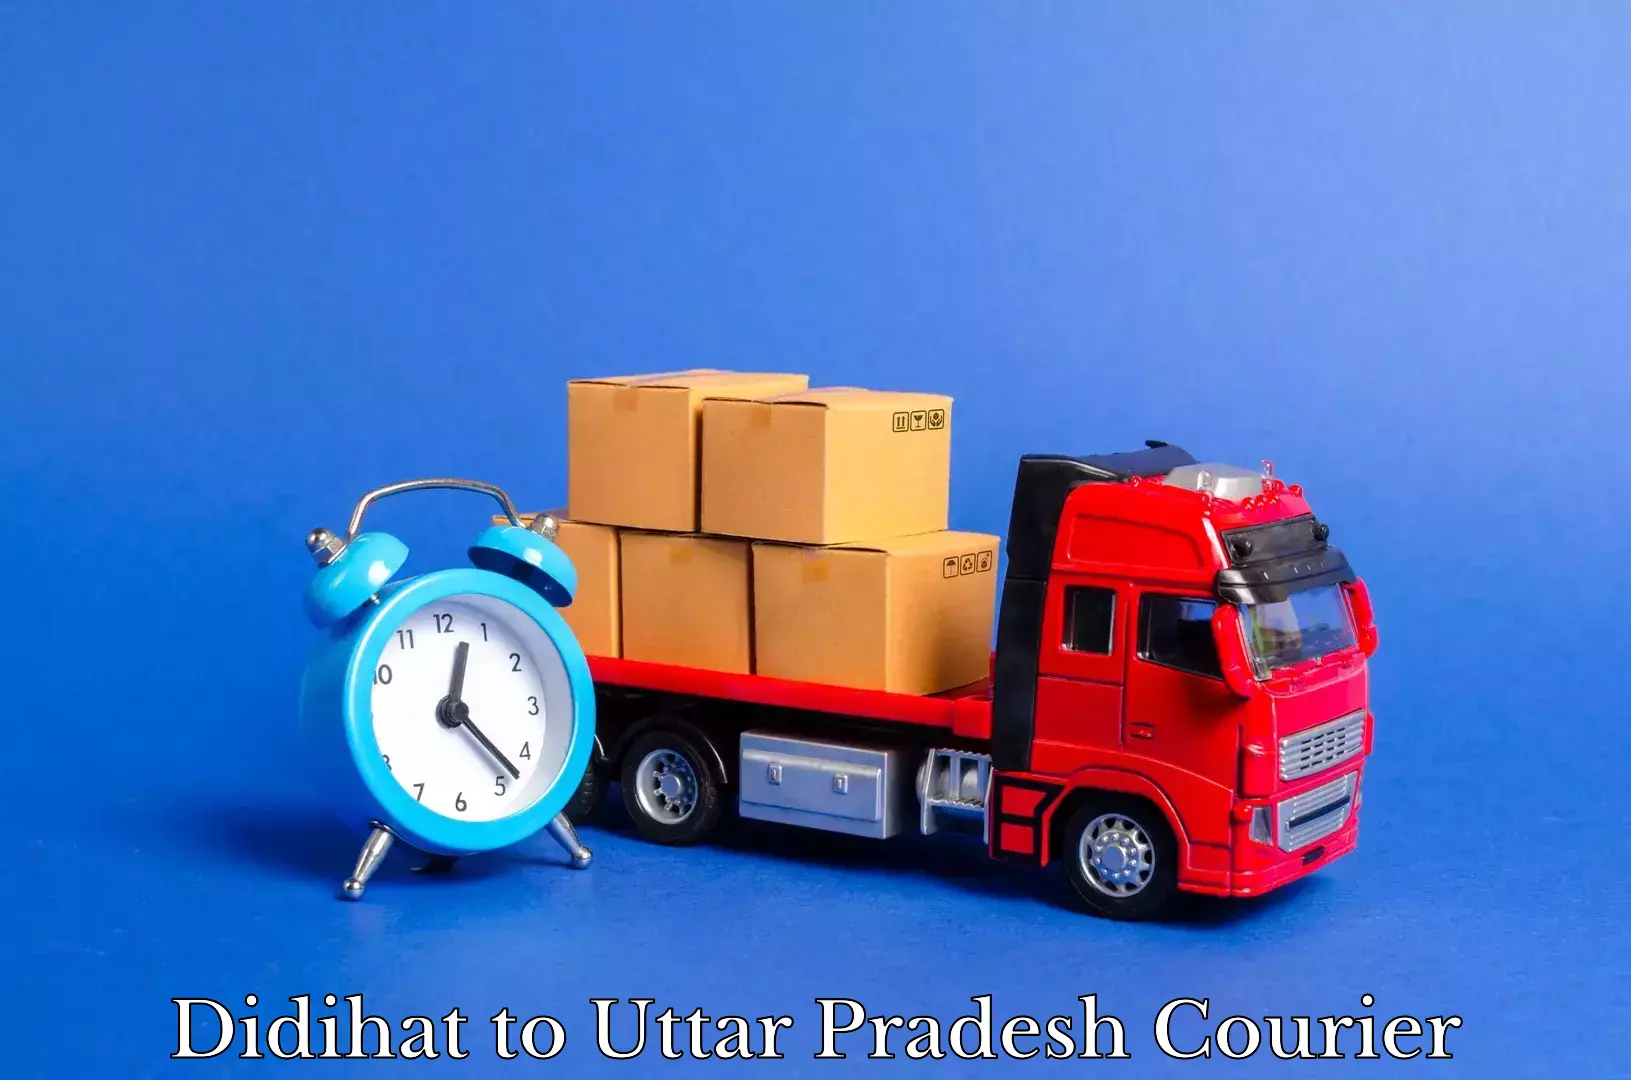 Reliable relocation services Didihat to Ayodhya